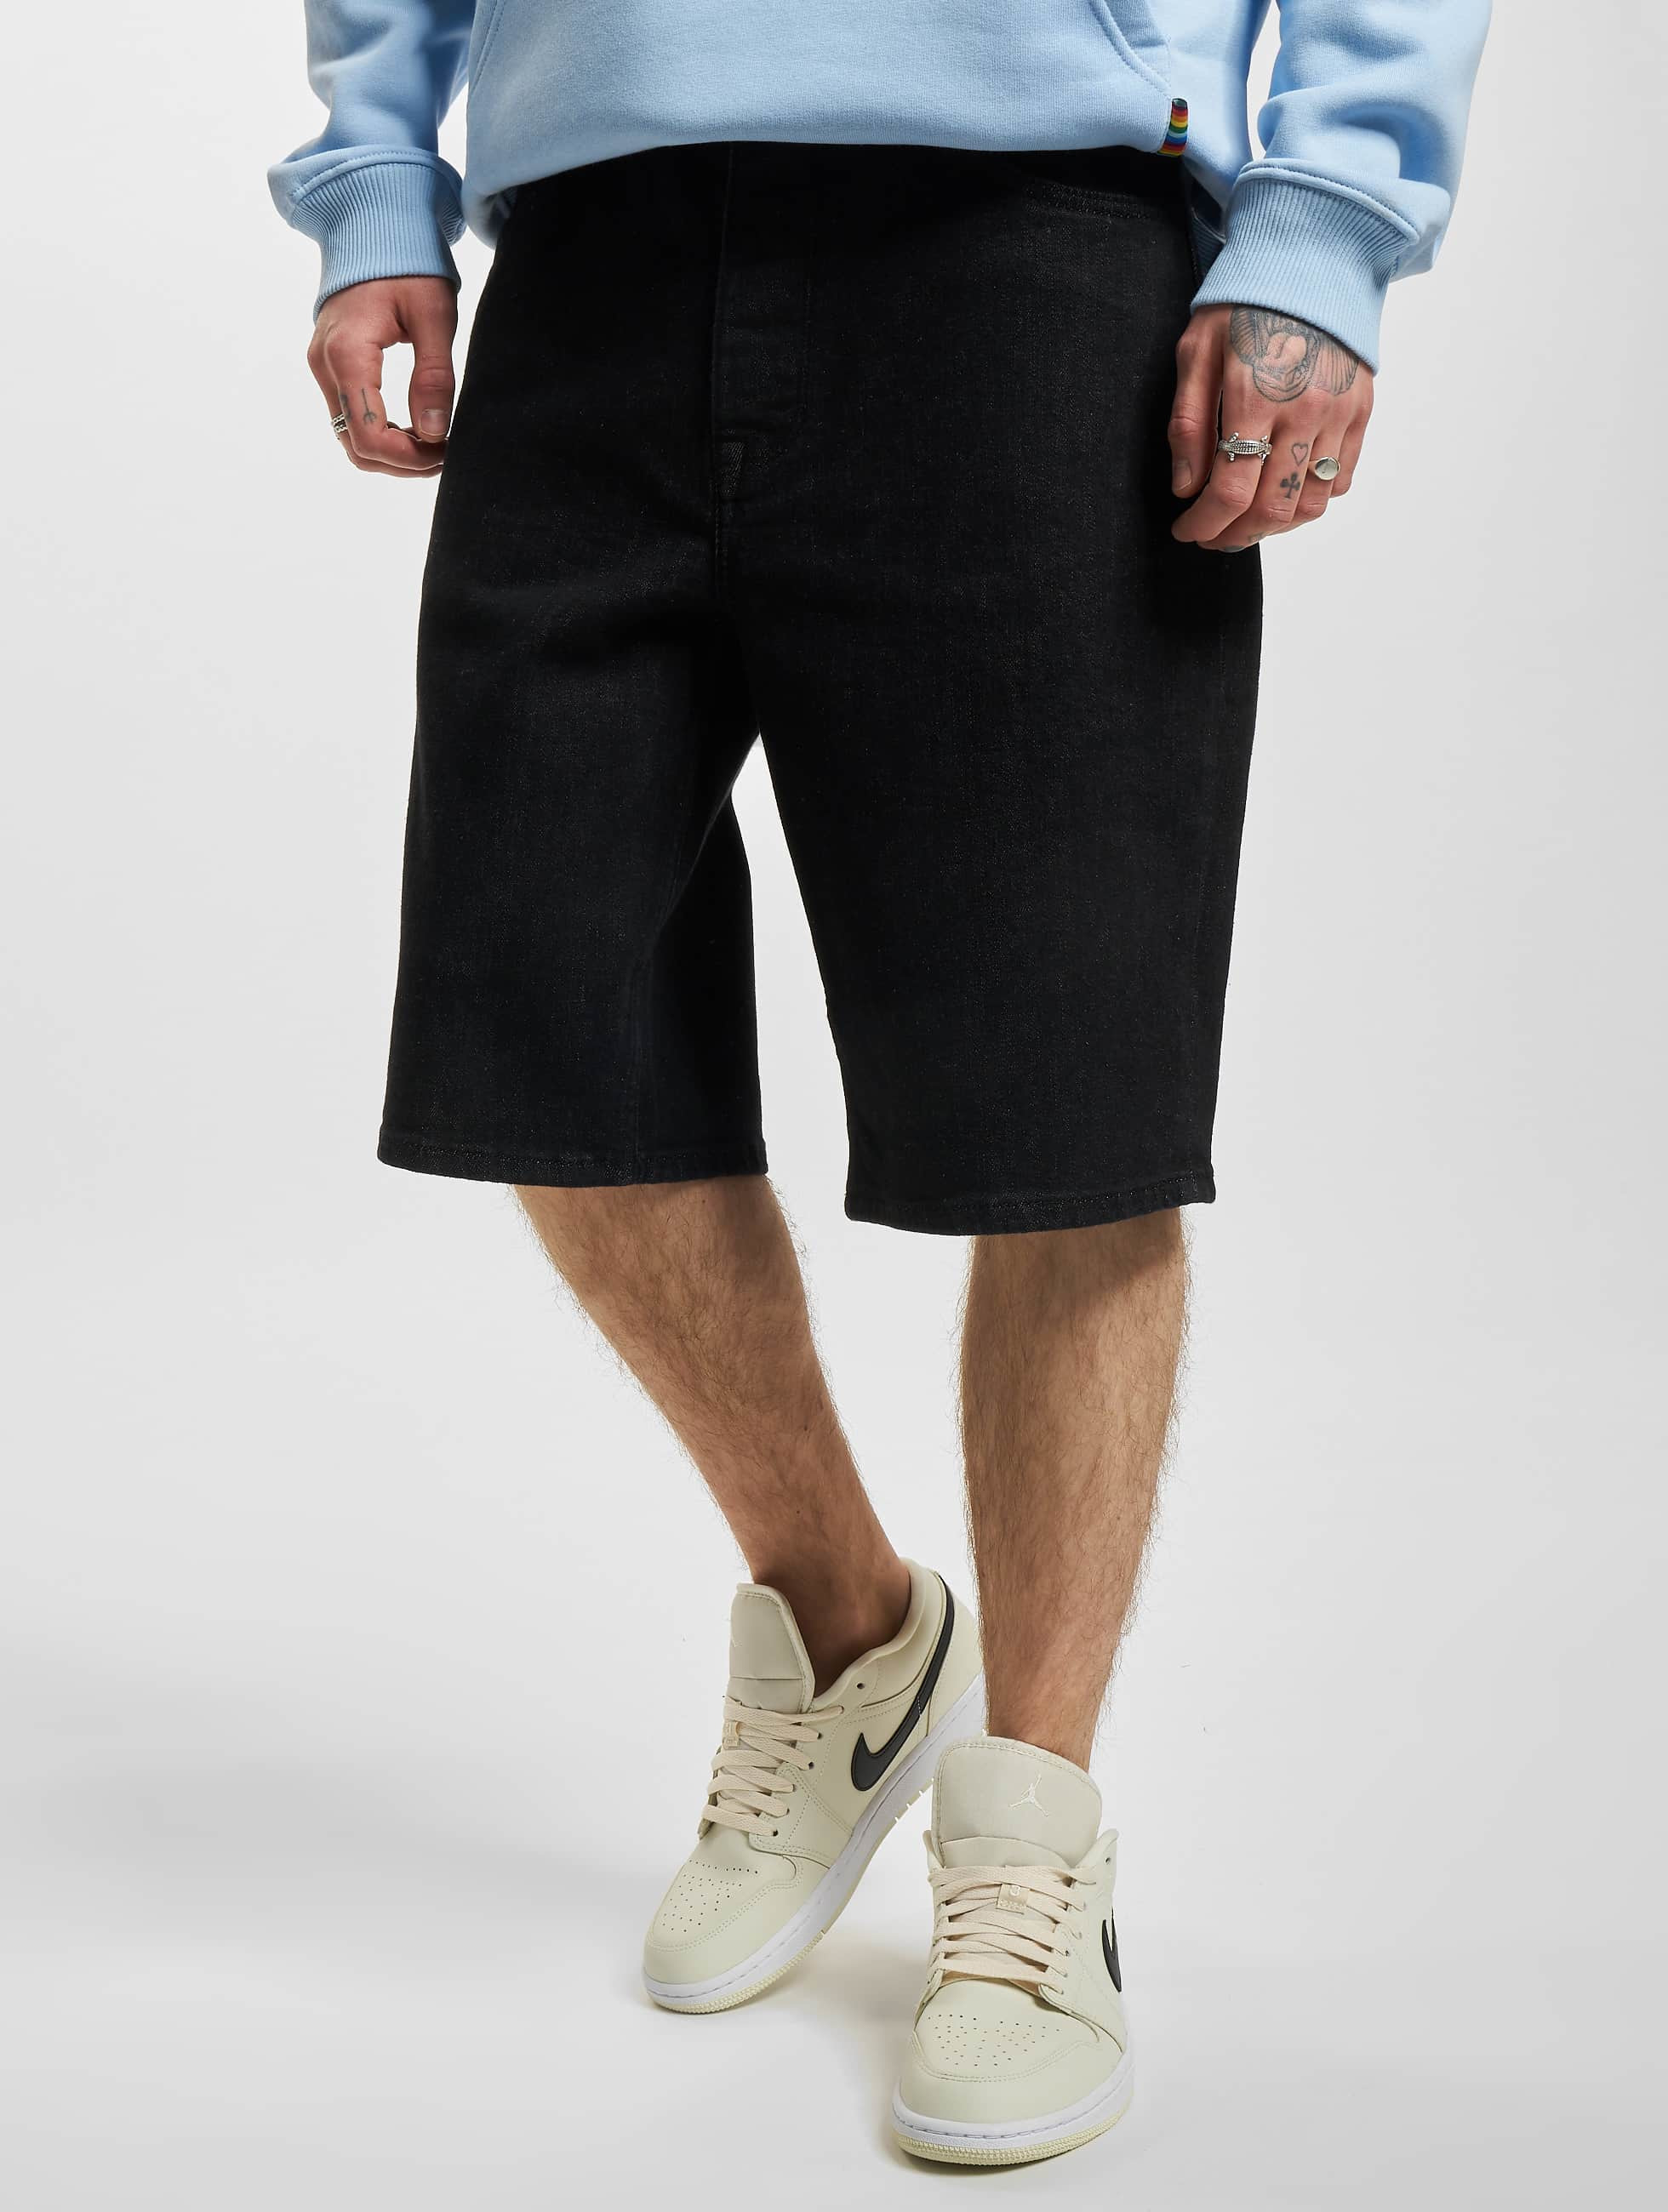 Homeboy Pant / Short X-Tra Baggy in black 995484